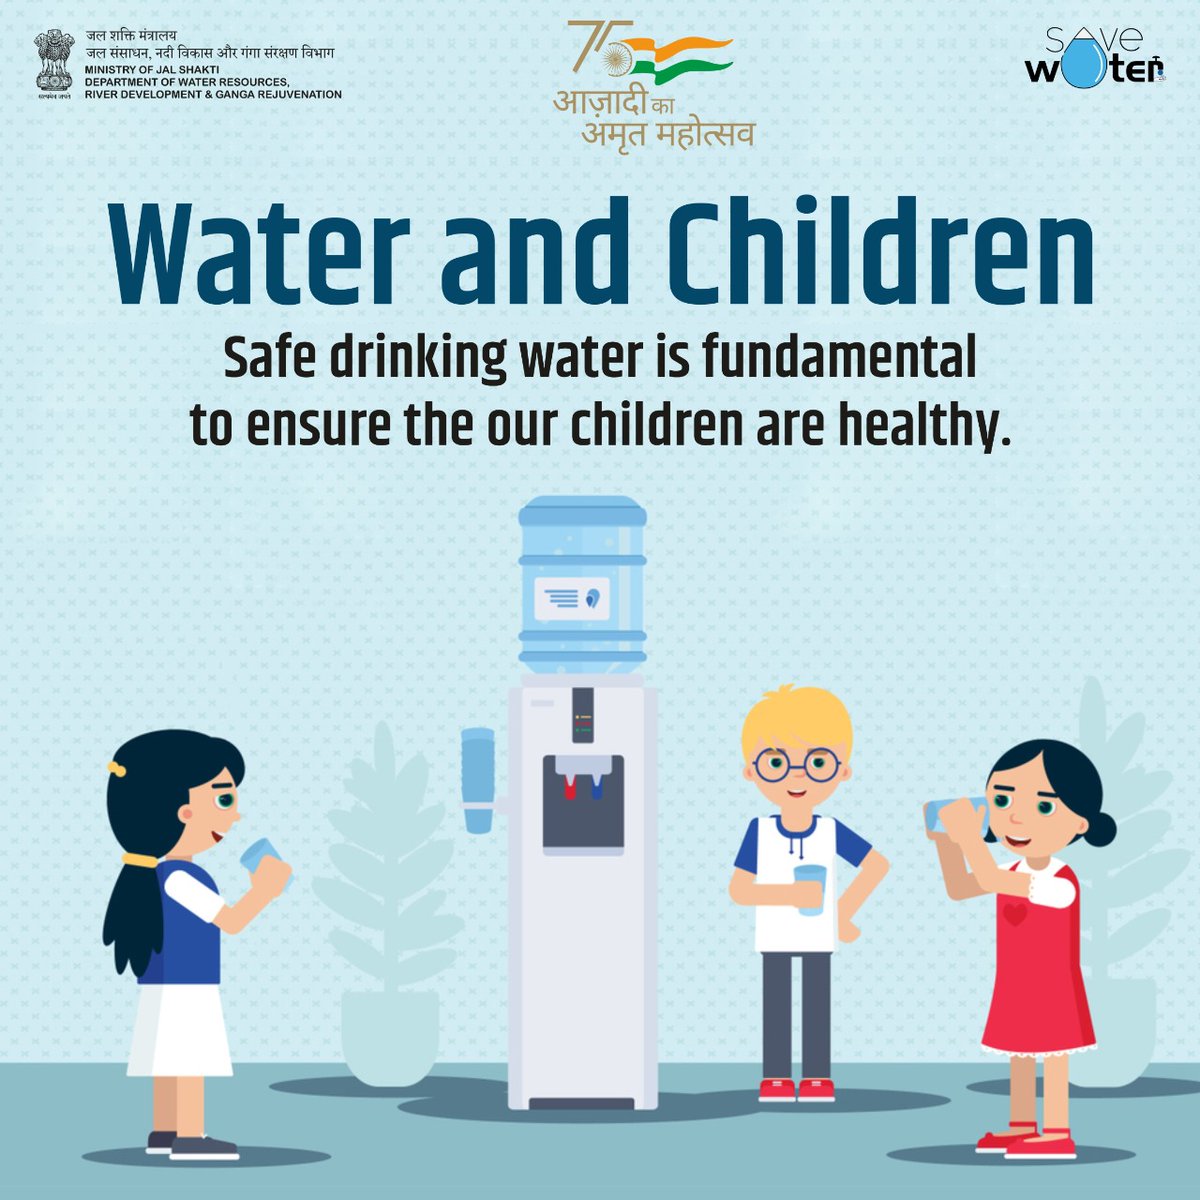 #Azadi Ka #AmritMahotsav

Let’ s unite and support safe drinking water so that our children lead a healthy life.

#WaterForChildren